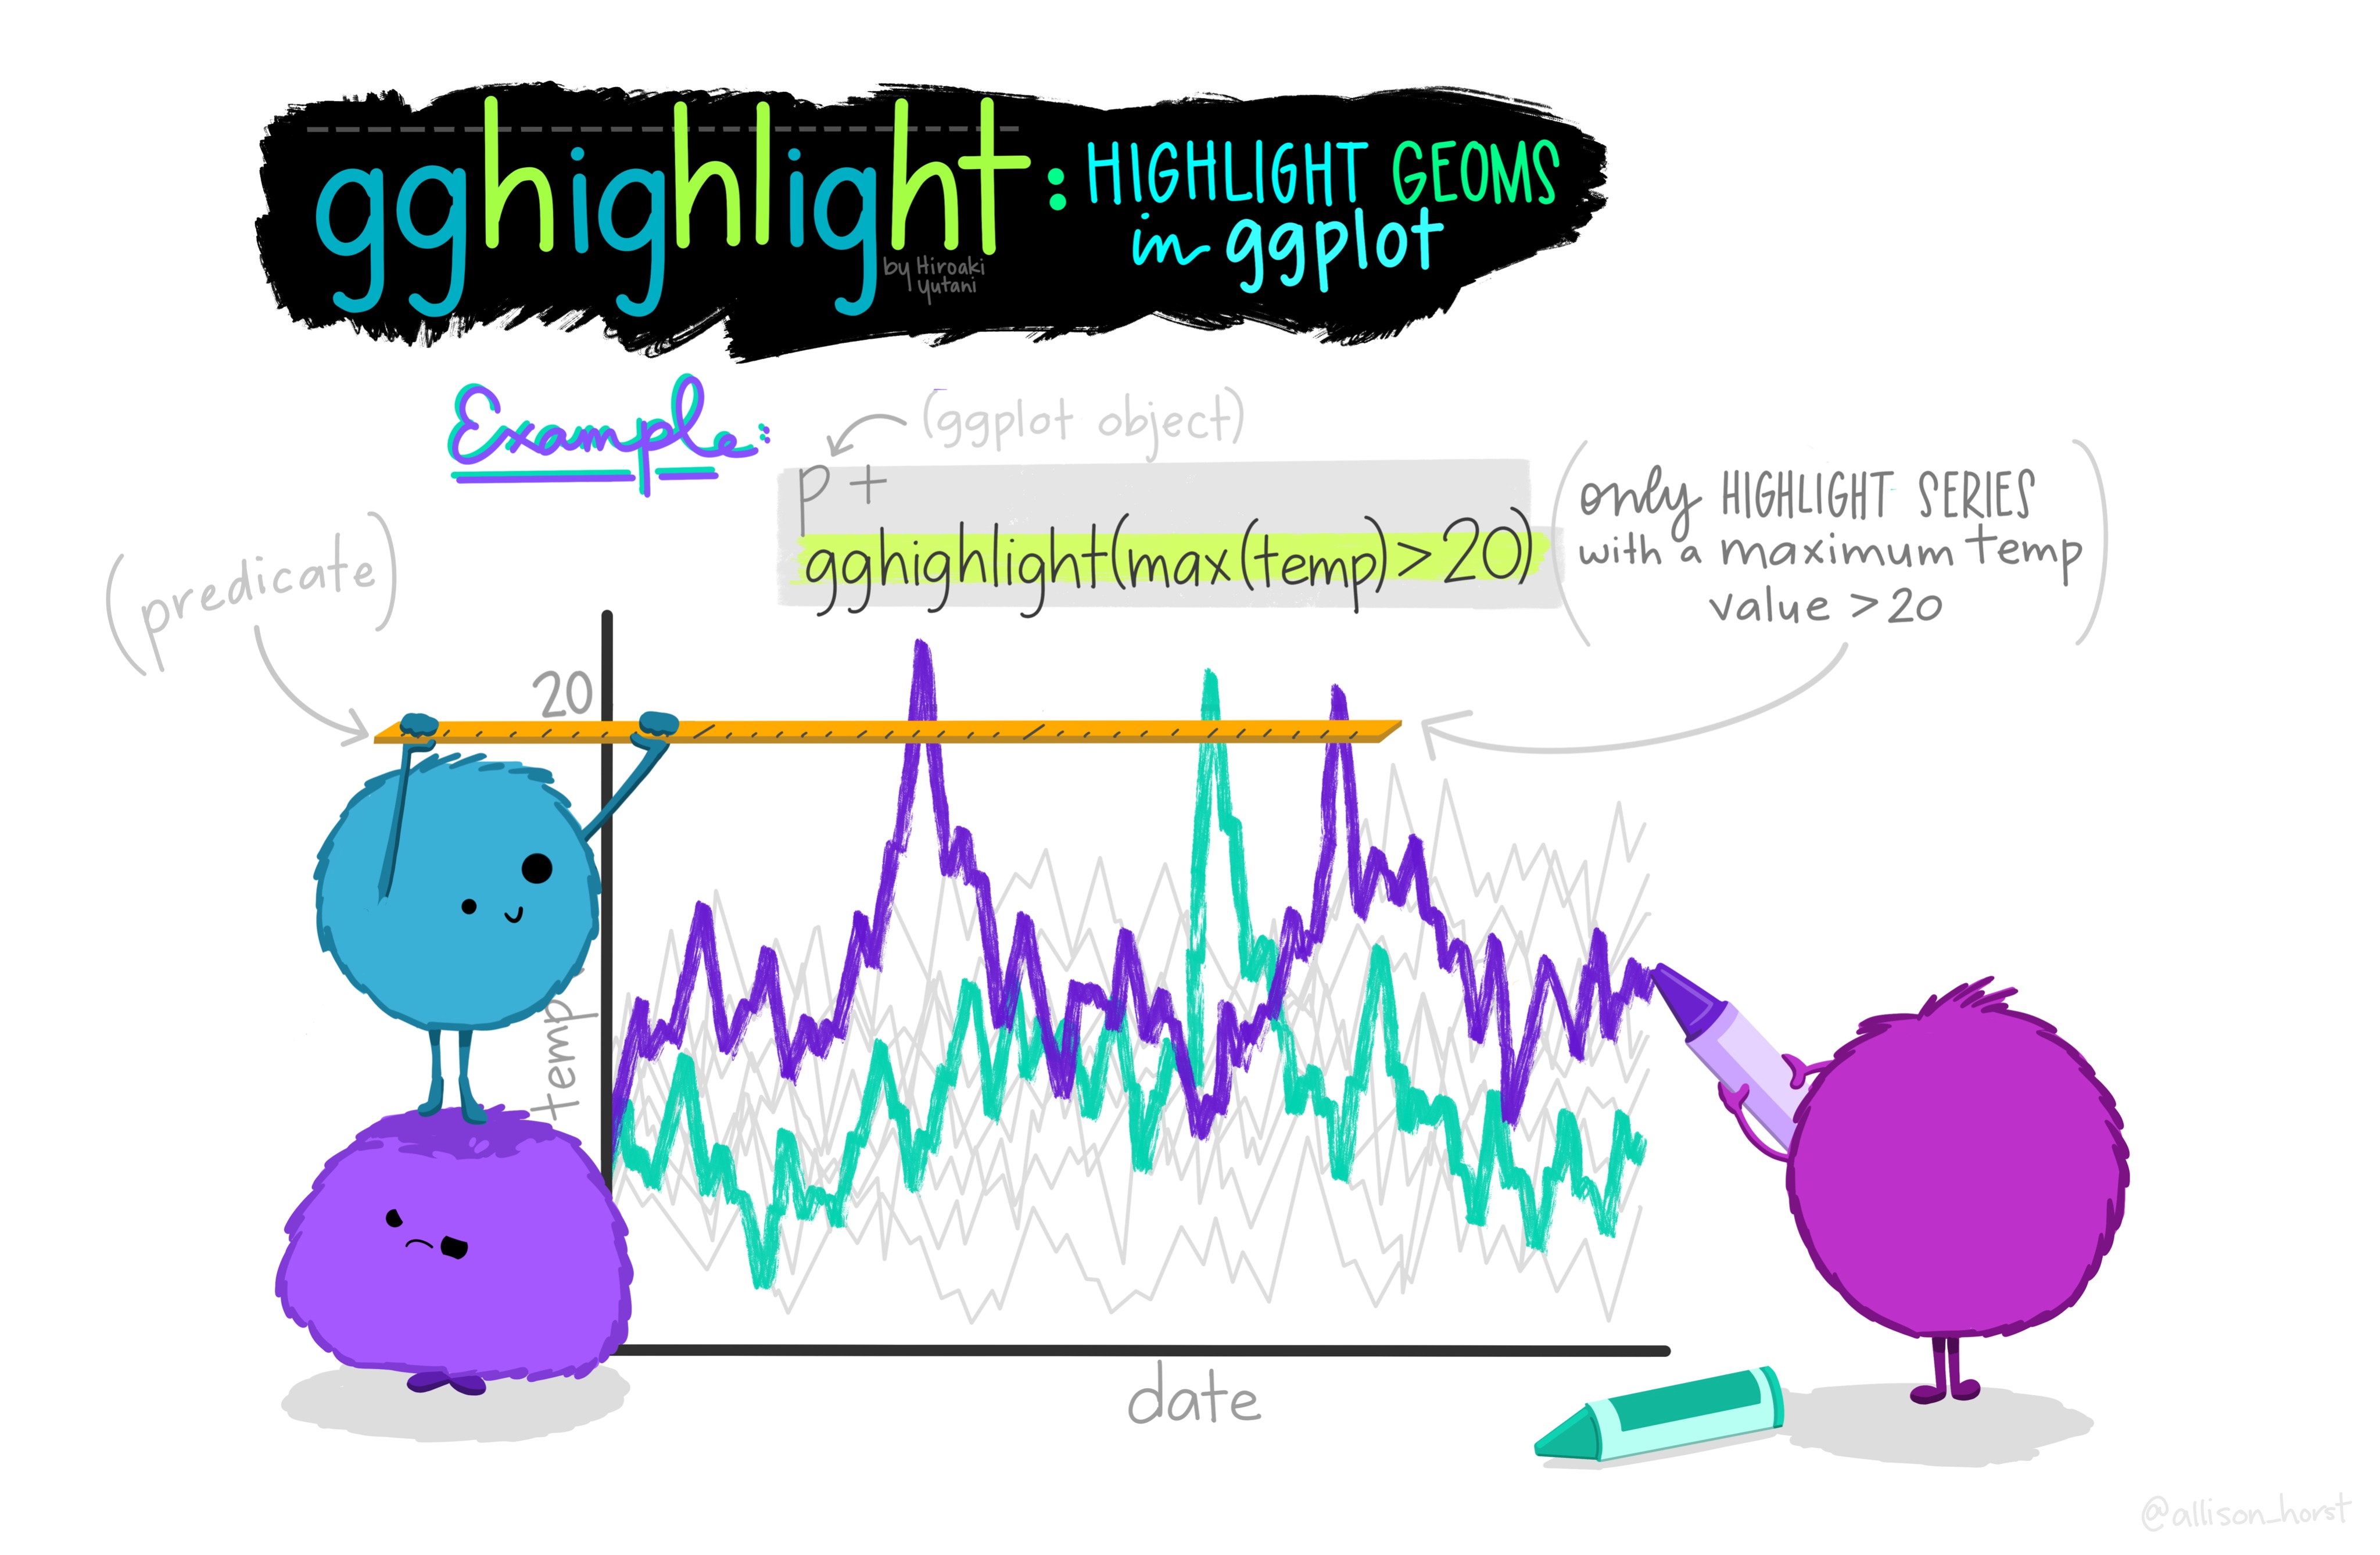 A cartoon of 3 fuzzy monsters making a ggplot. Titled gghighlight: highlight geoms in ggplot, and shows an example of a line plot with many grey lines in the background, and a purple and blue line highlighted in color allowing the viewer to see the series that have a max temp value over 20.